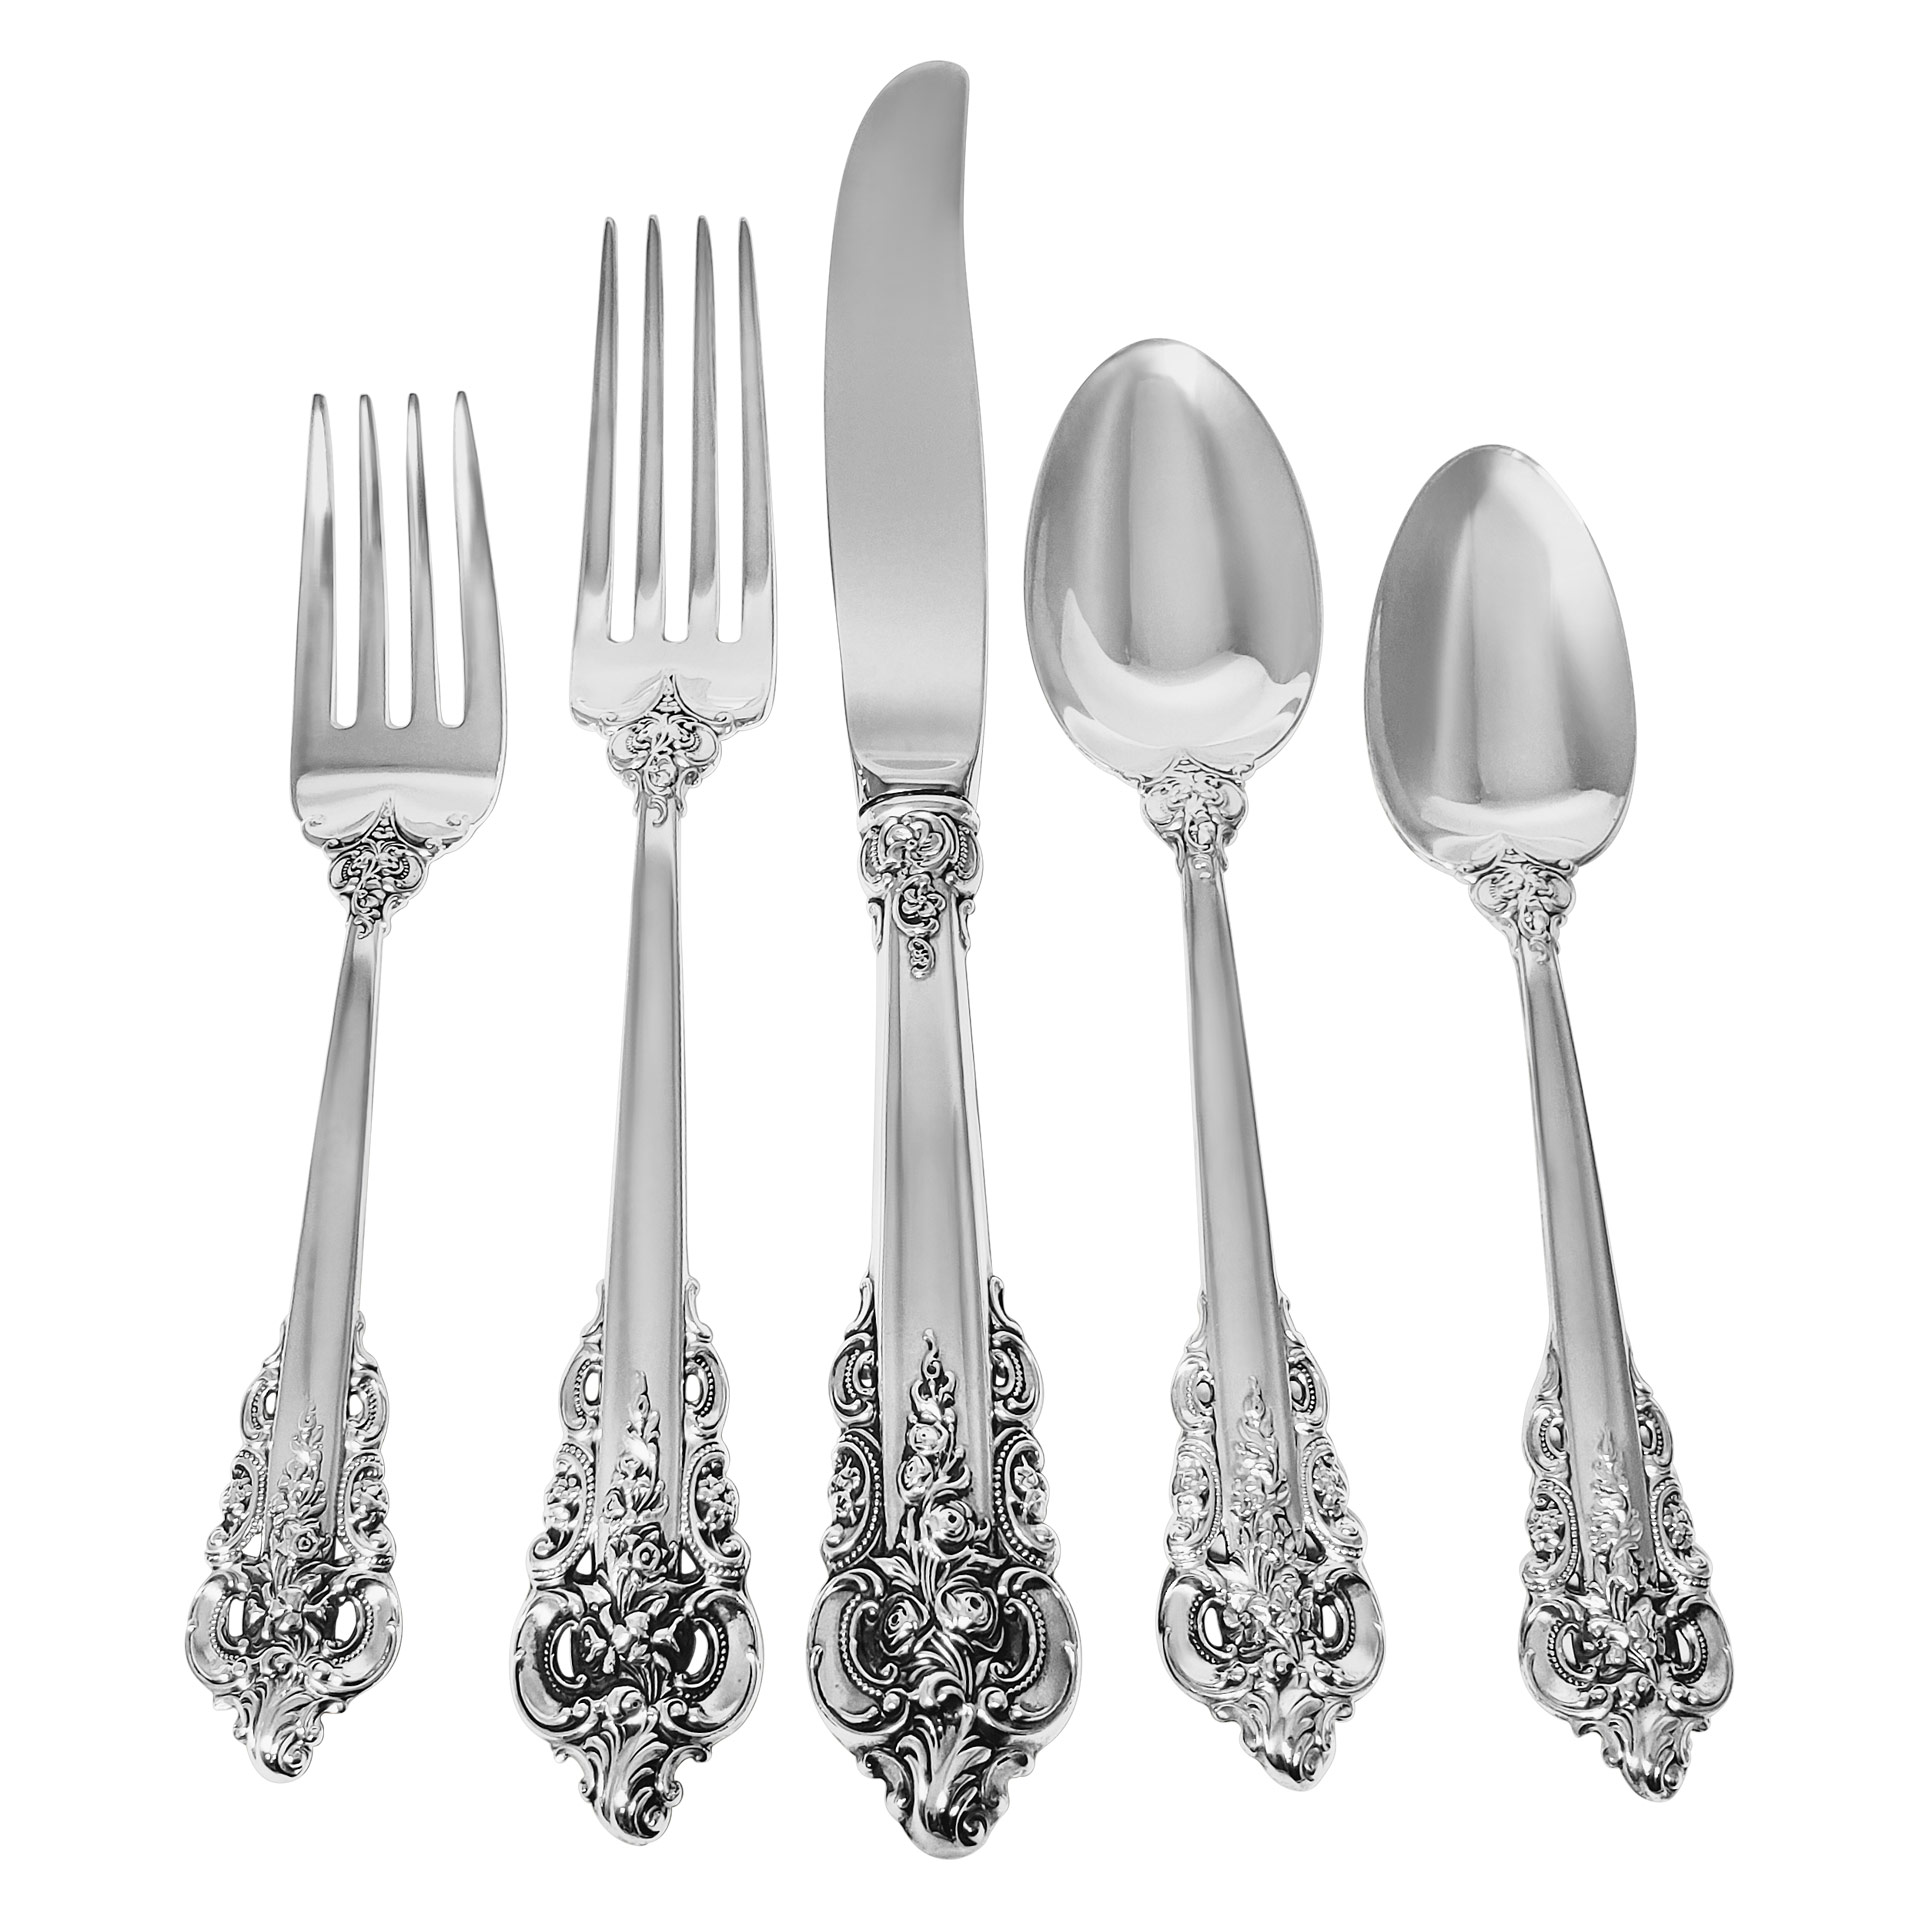 "GRANDE BAROQUE" Sterling Silver Flatware Set, patented by Wallace in 1941- 5 place setting for 24 + 14 serving pieces. TOTAL 134 pieces). image 1